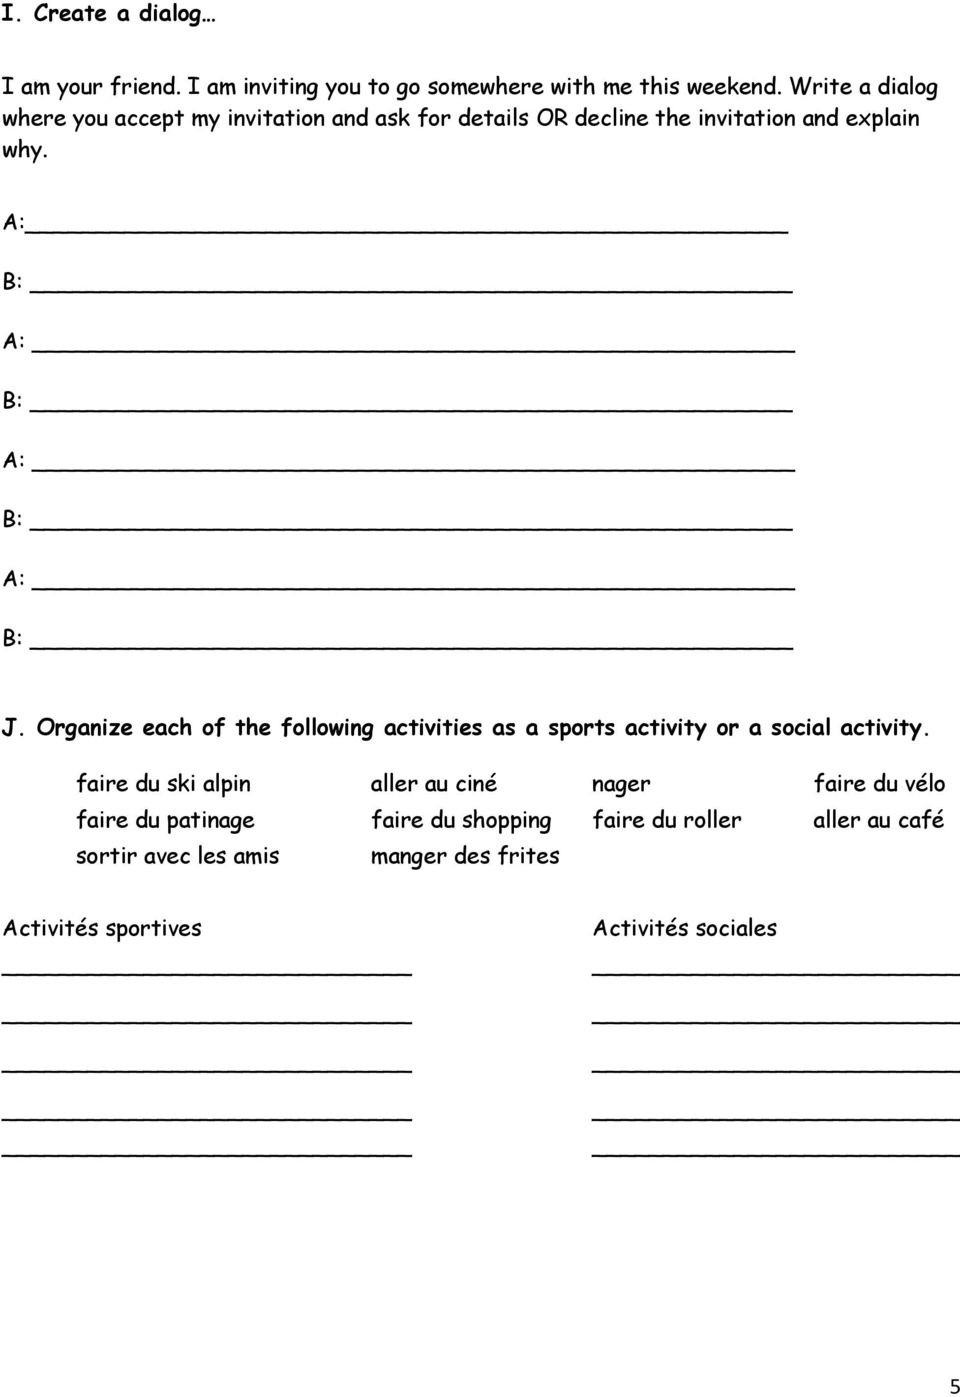 Organize each of the following activities as a sports activity or a social activity.